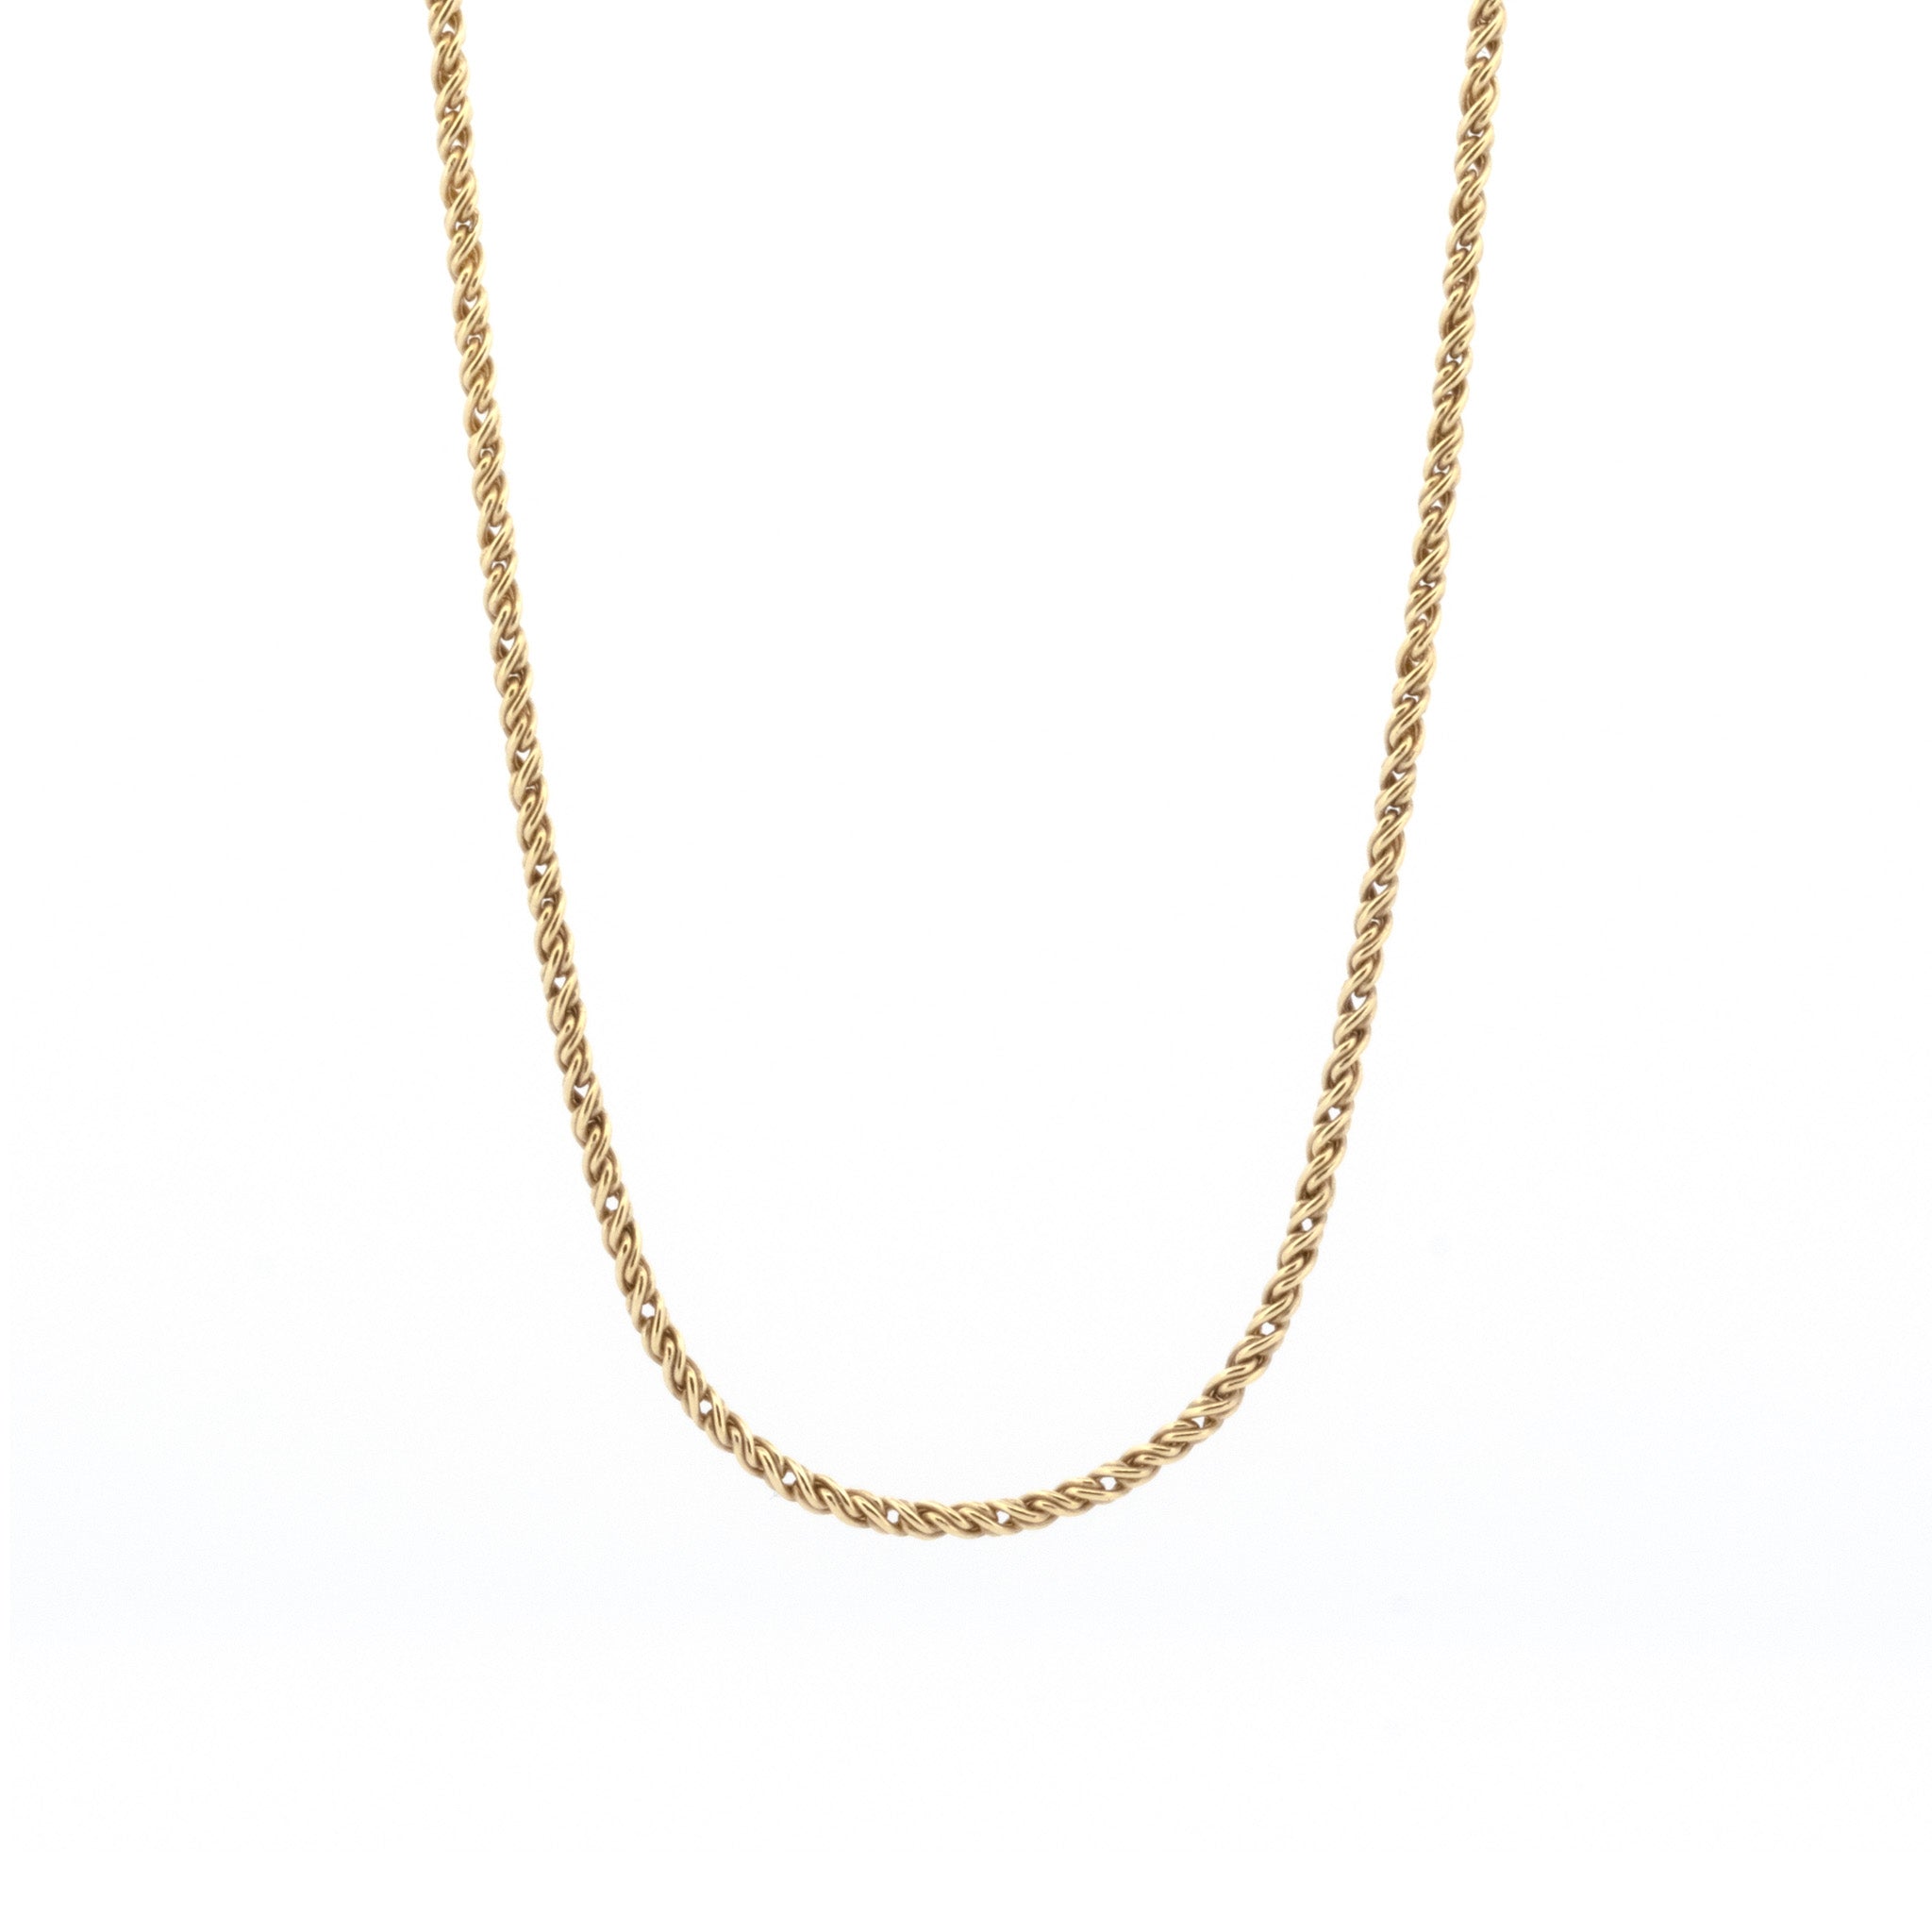 An Aiden Jae Banyan Rope Chain Necklace on a white background.